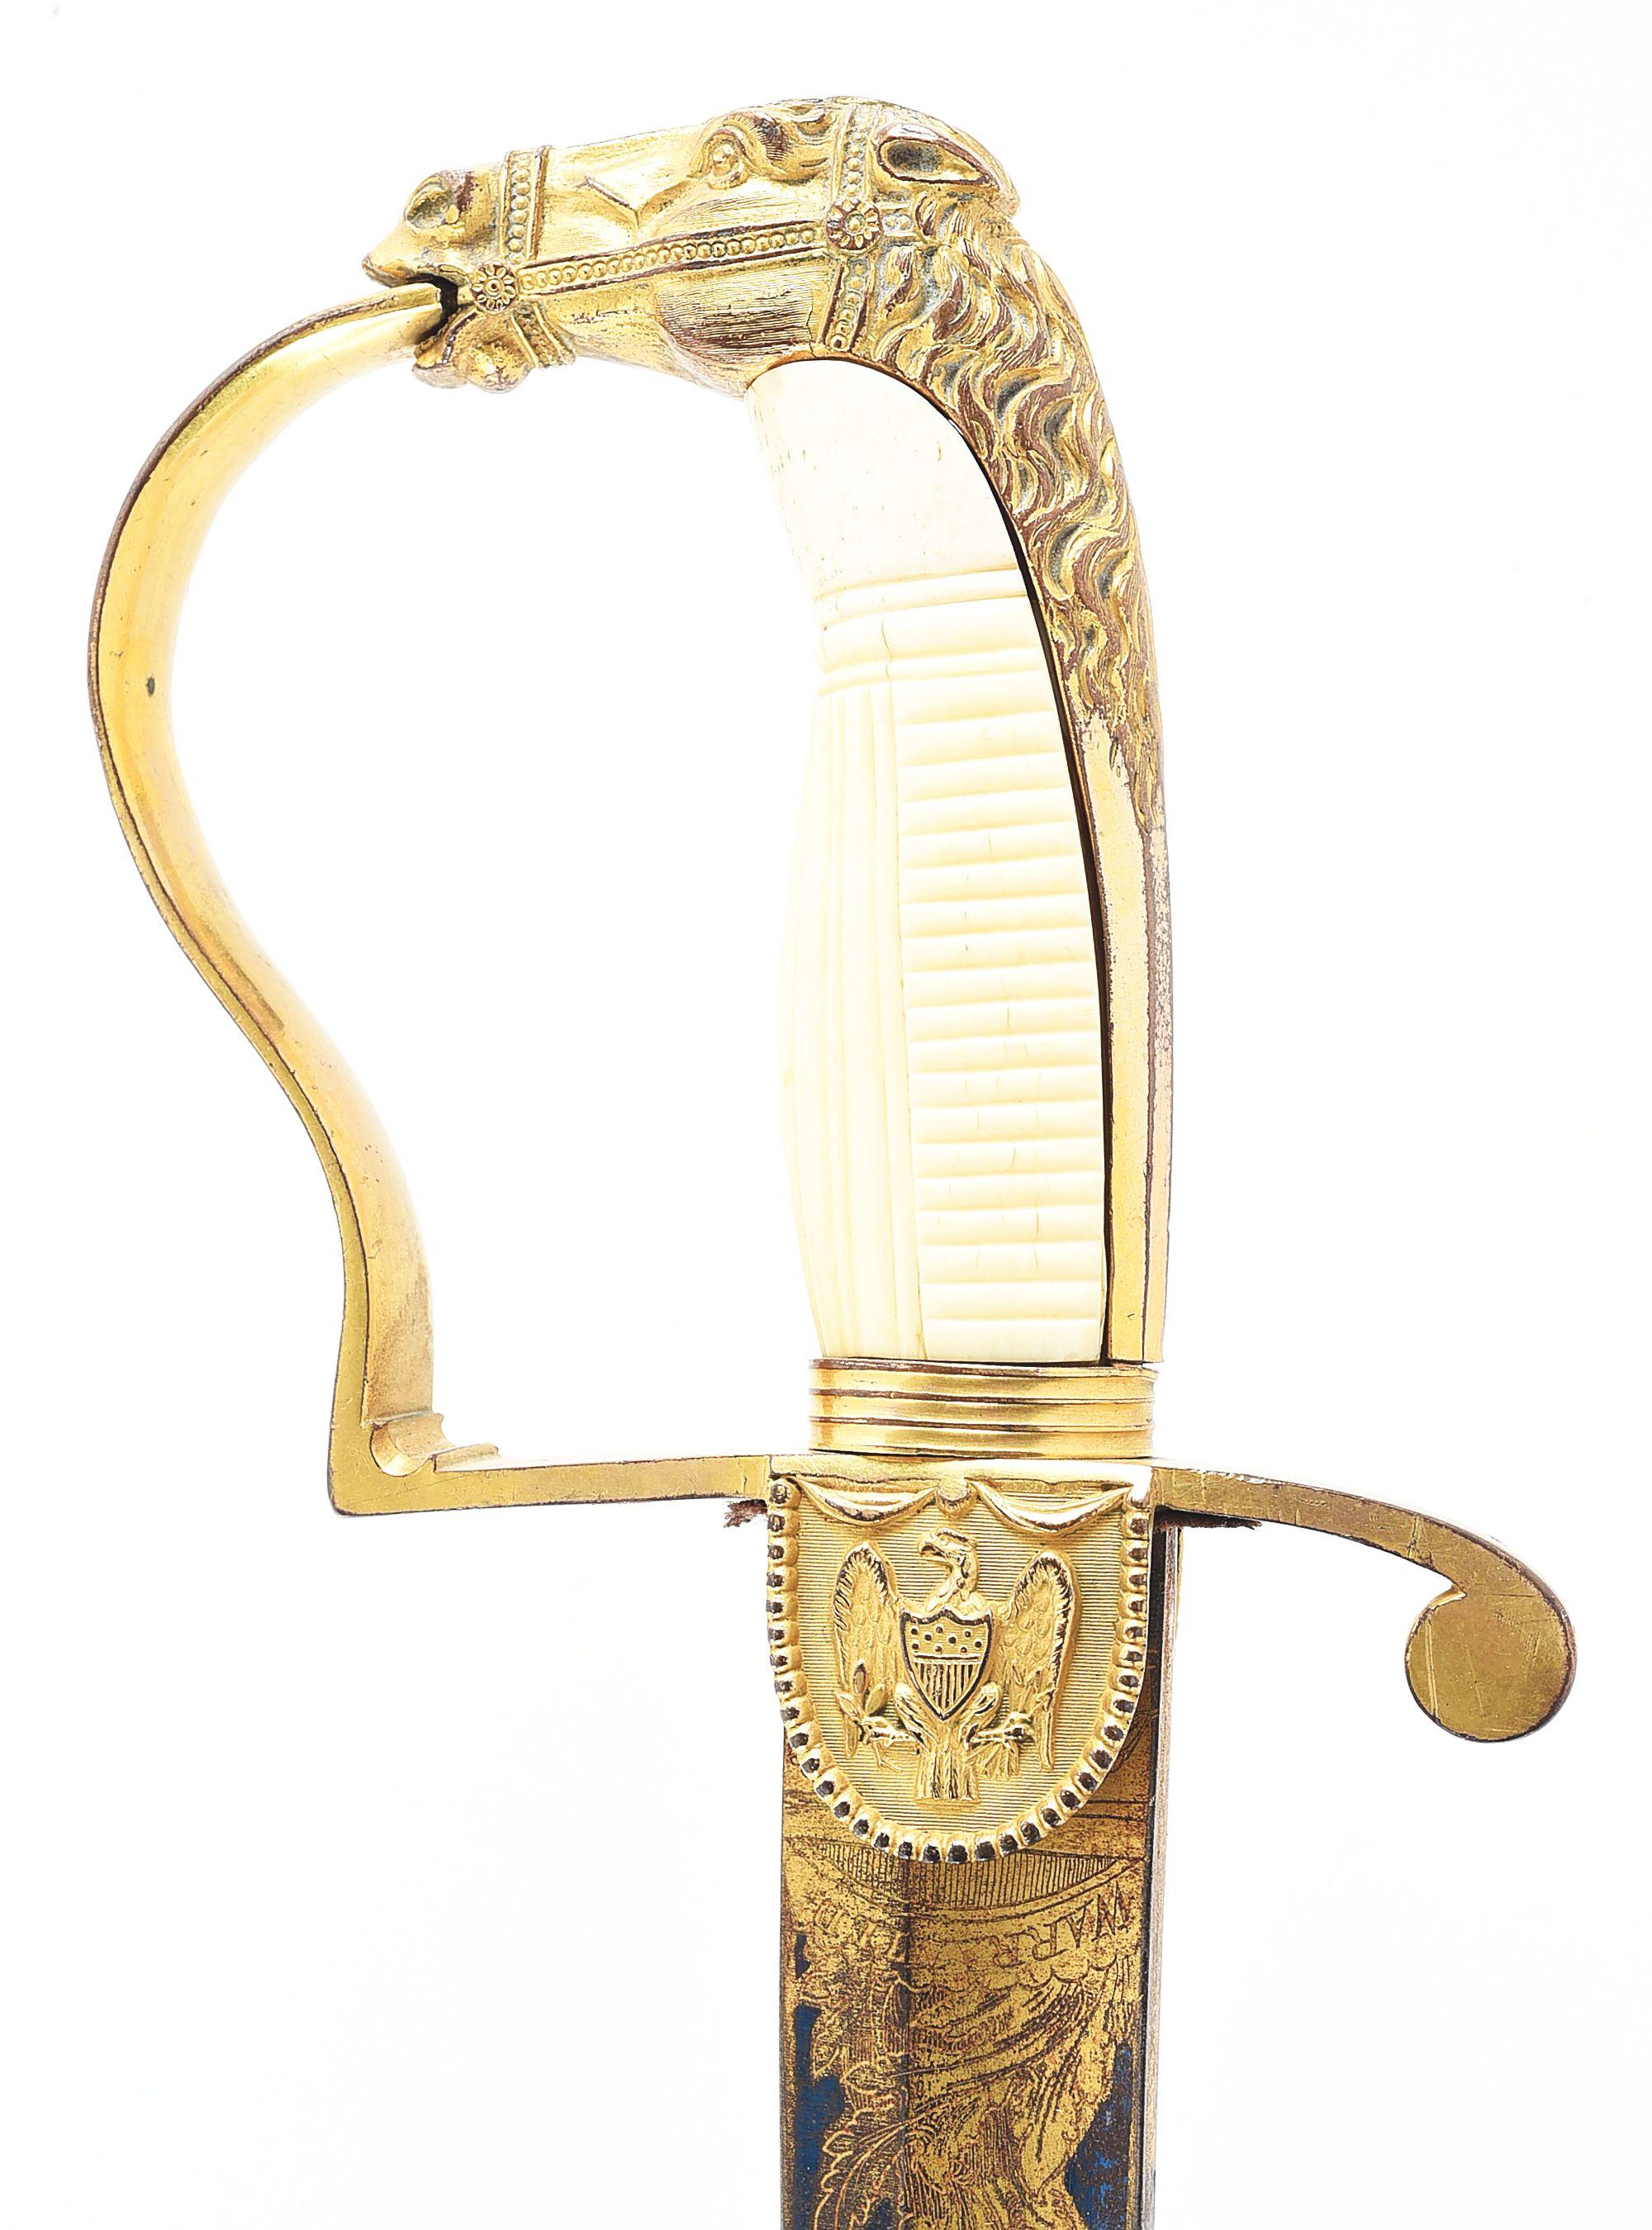 ELABORATE AND FINE AMERICAN HORSE HEAD POMMEL SABER WITH SCABBARD.